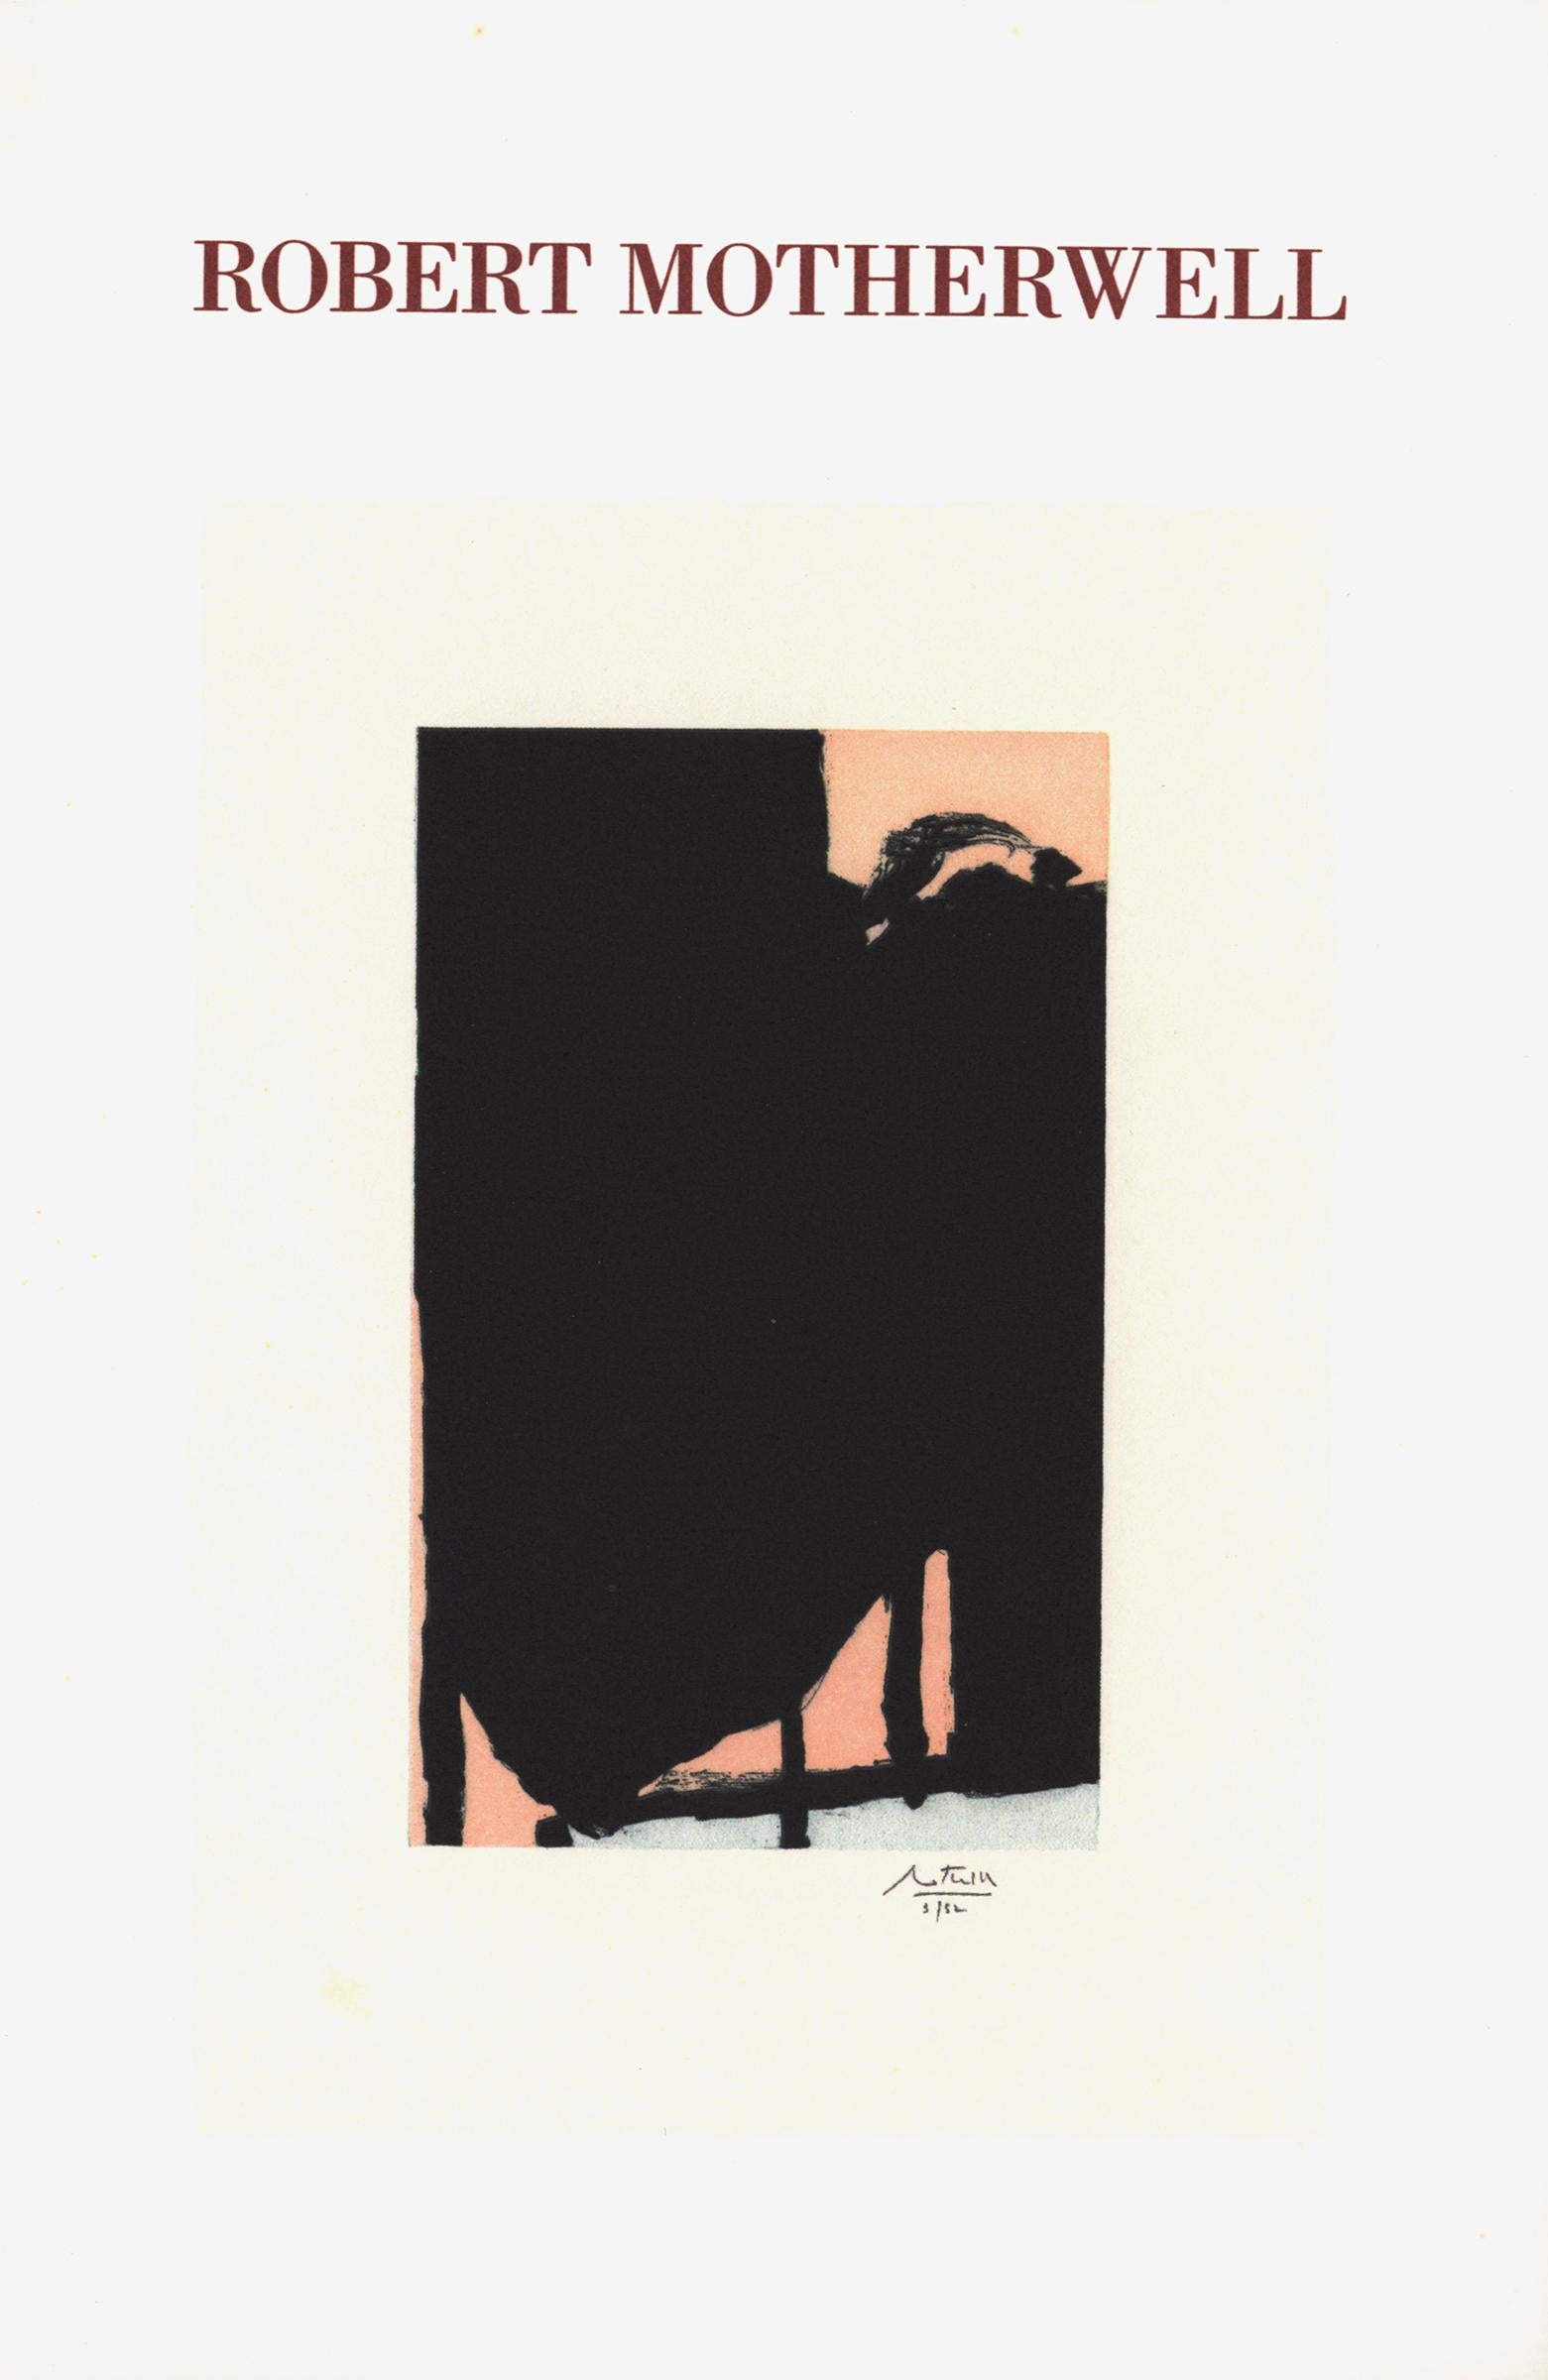 Vintage Robert Motherwell exhibition announcements (Set of 3) For Sale 2